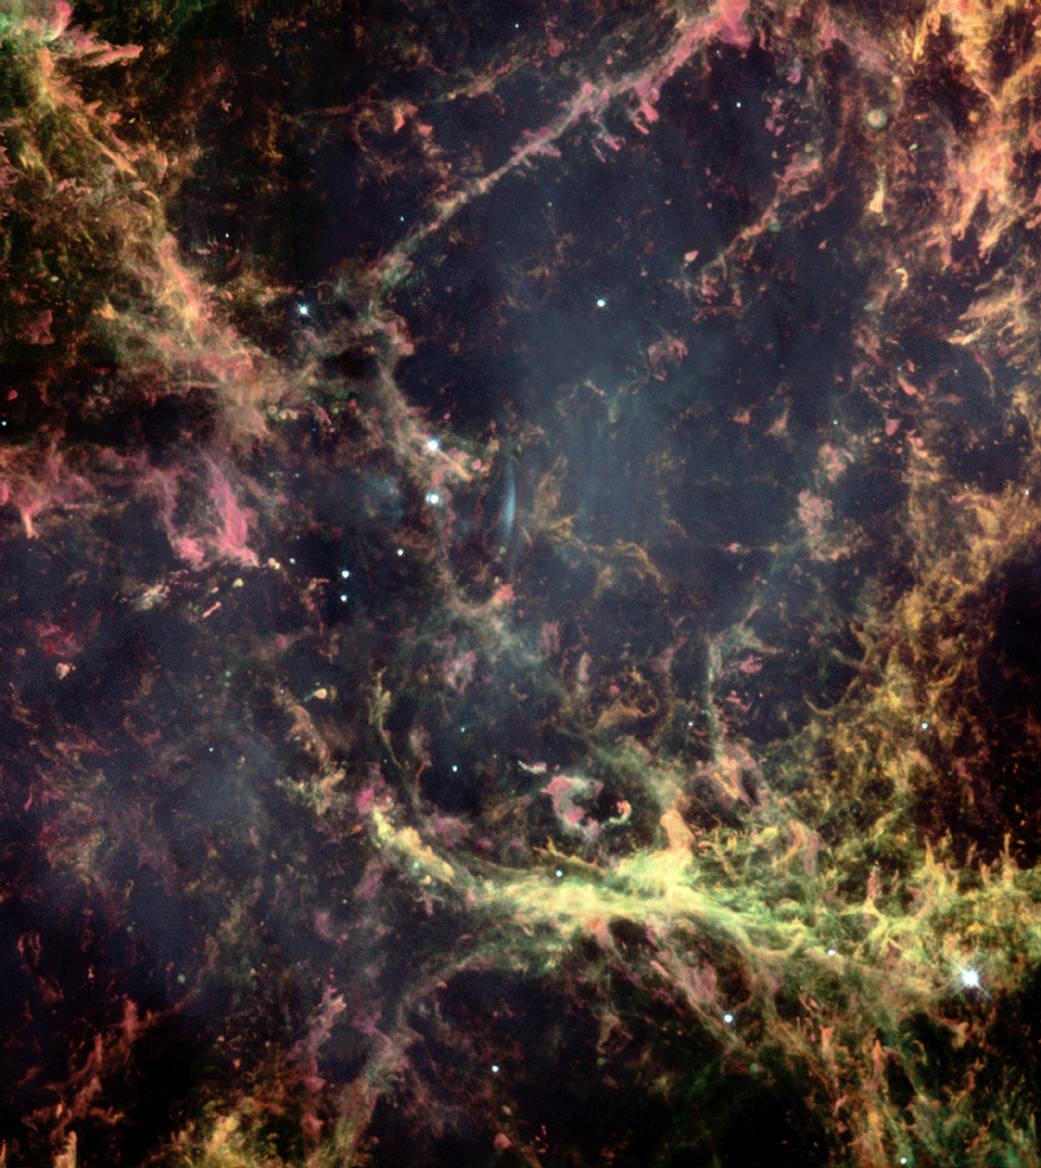 Into the Heart of the Crab Nebula